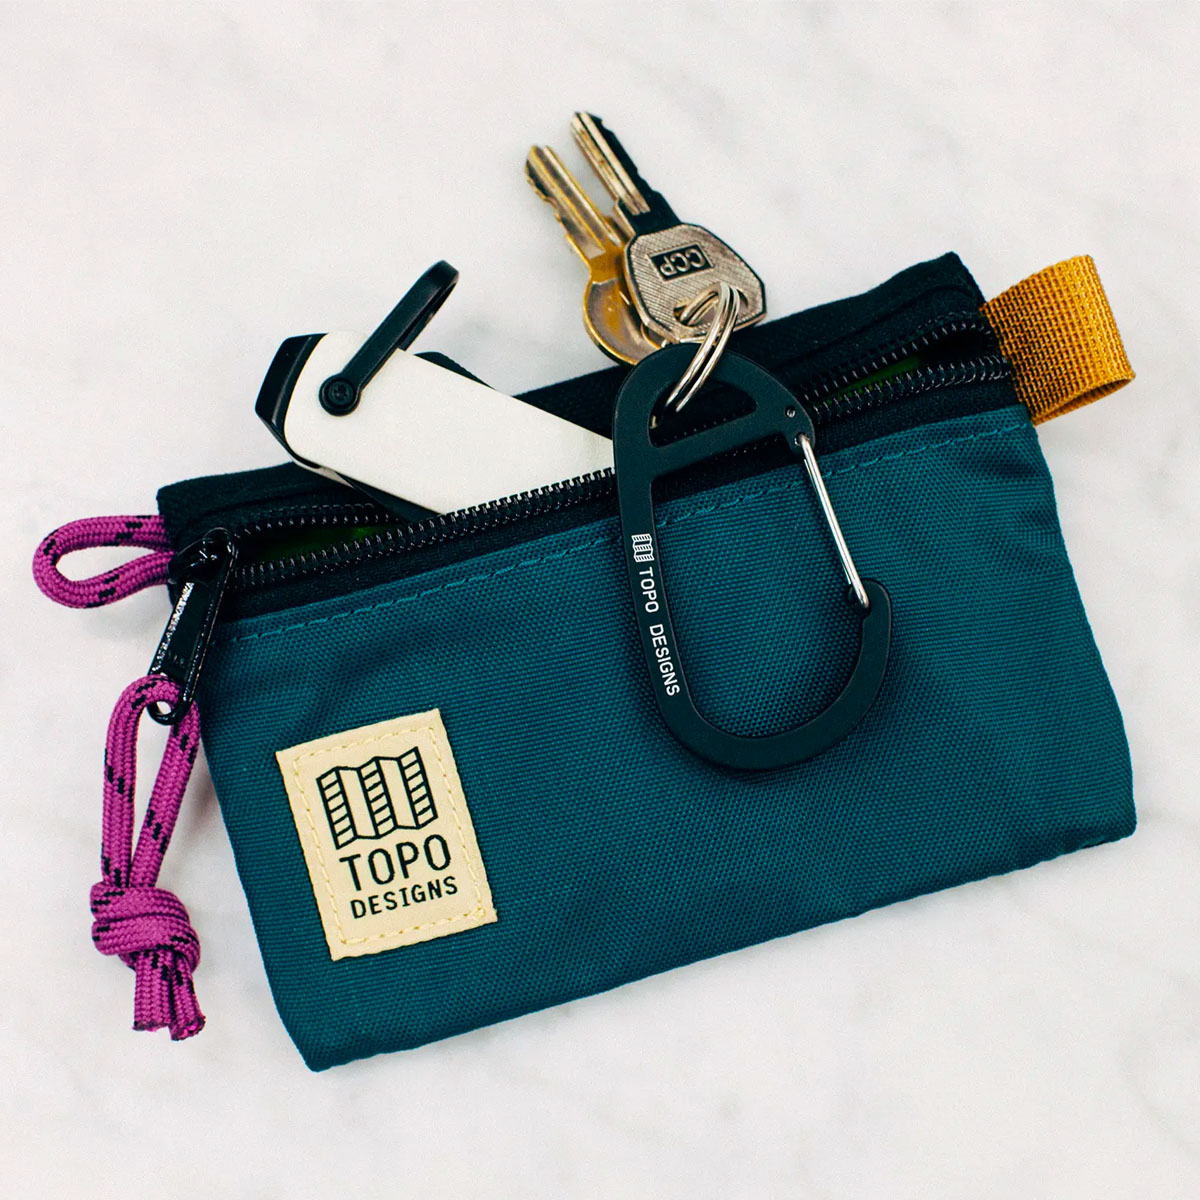 Topo Designs Accessory Bags Botanic Green/Black 3 Sizes, Easy traveling, keeps the inside of your pack neat and organized